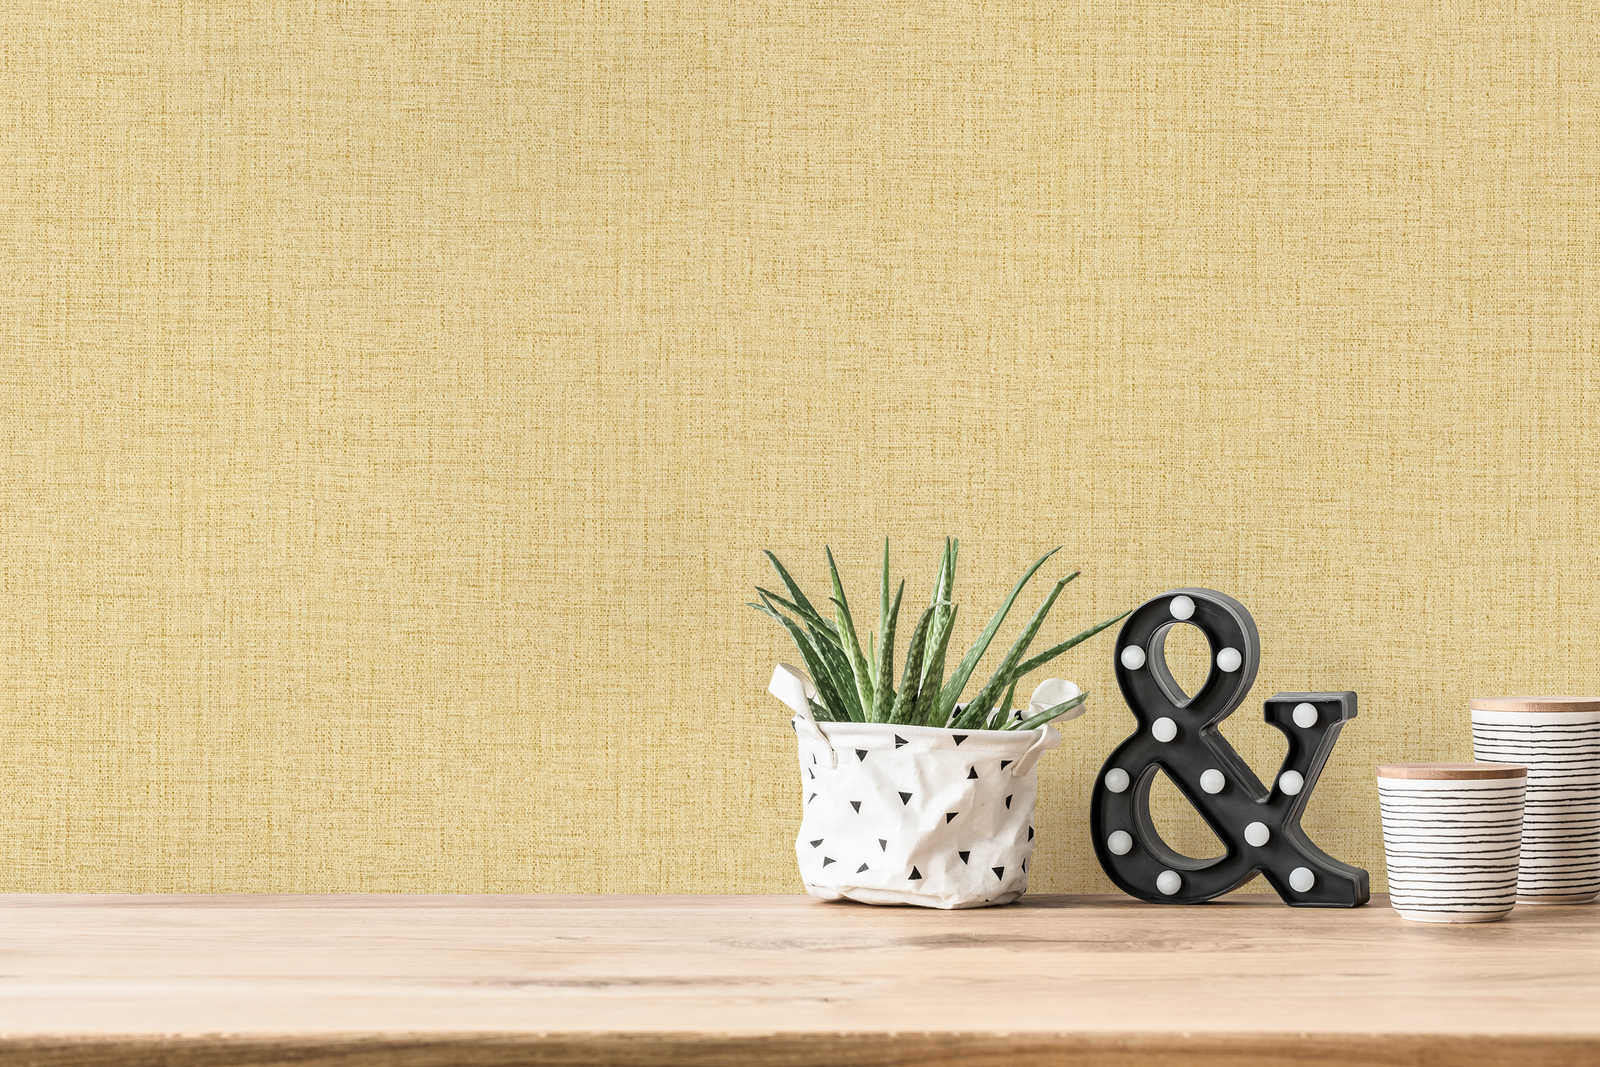             Textile look wallpaper mottled with structure - yellow
        